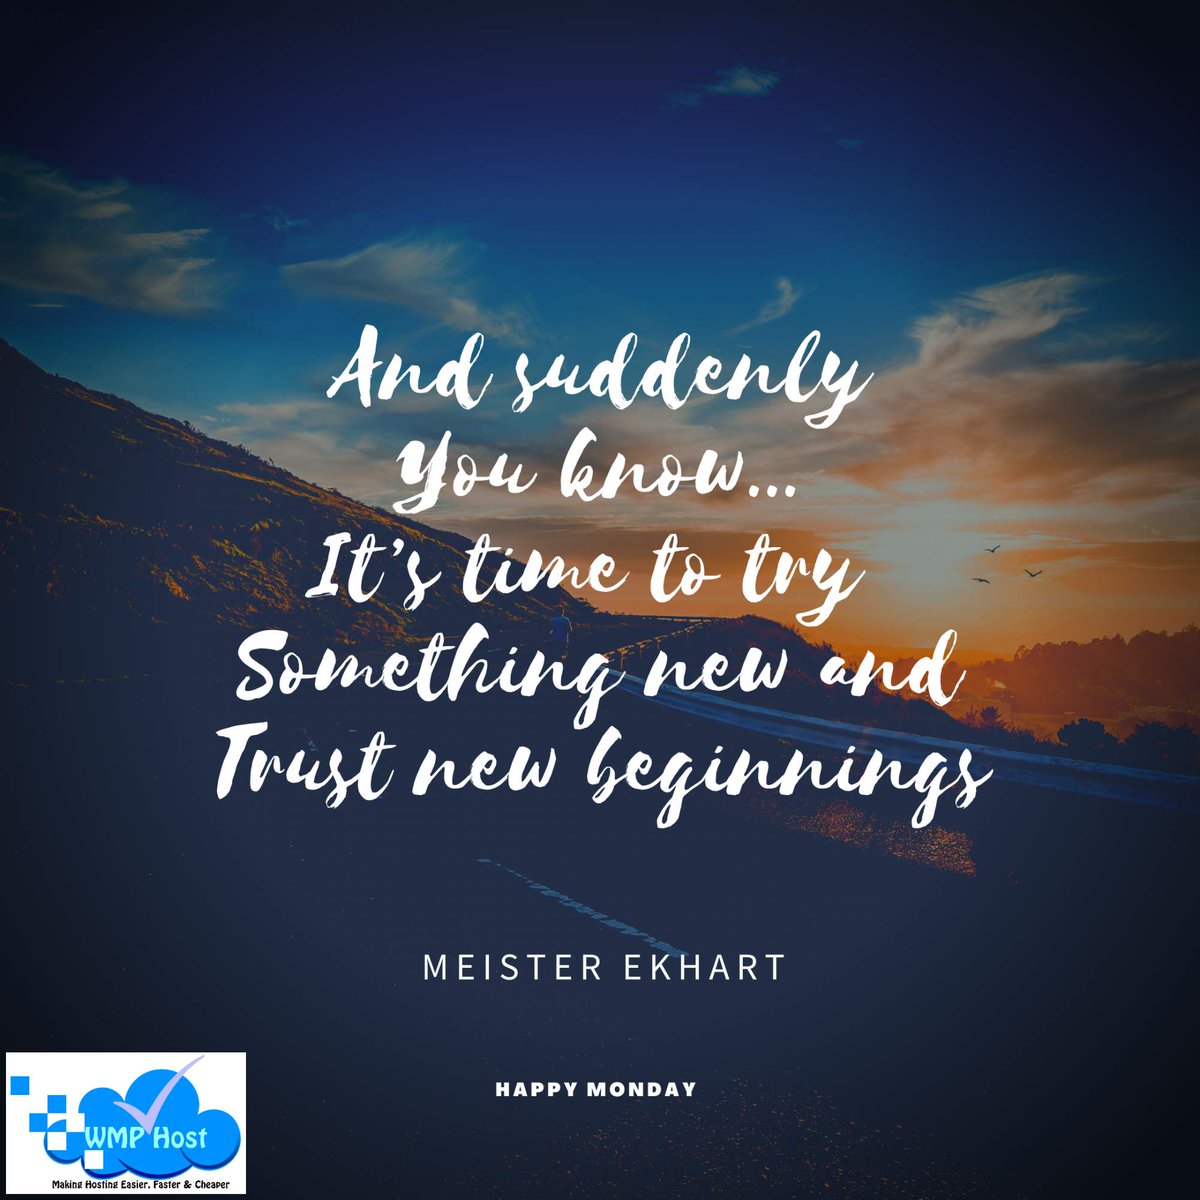 “And suddenly you know… It’s time to try something new and trust new beginnings.” - Meister Ekhart
#happymonday #dosomethingnew #newbeginnings